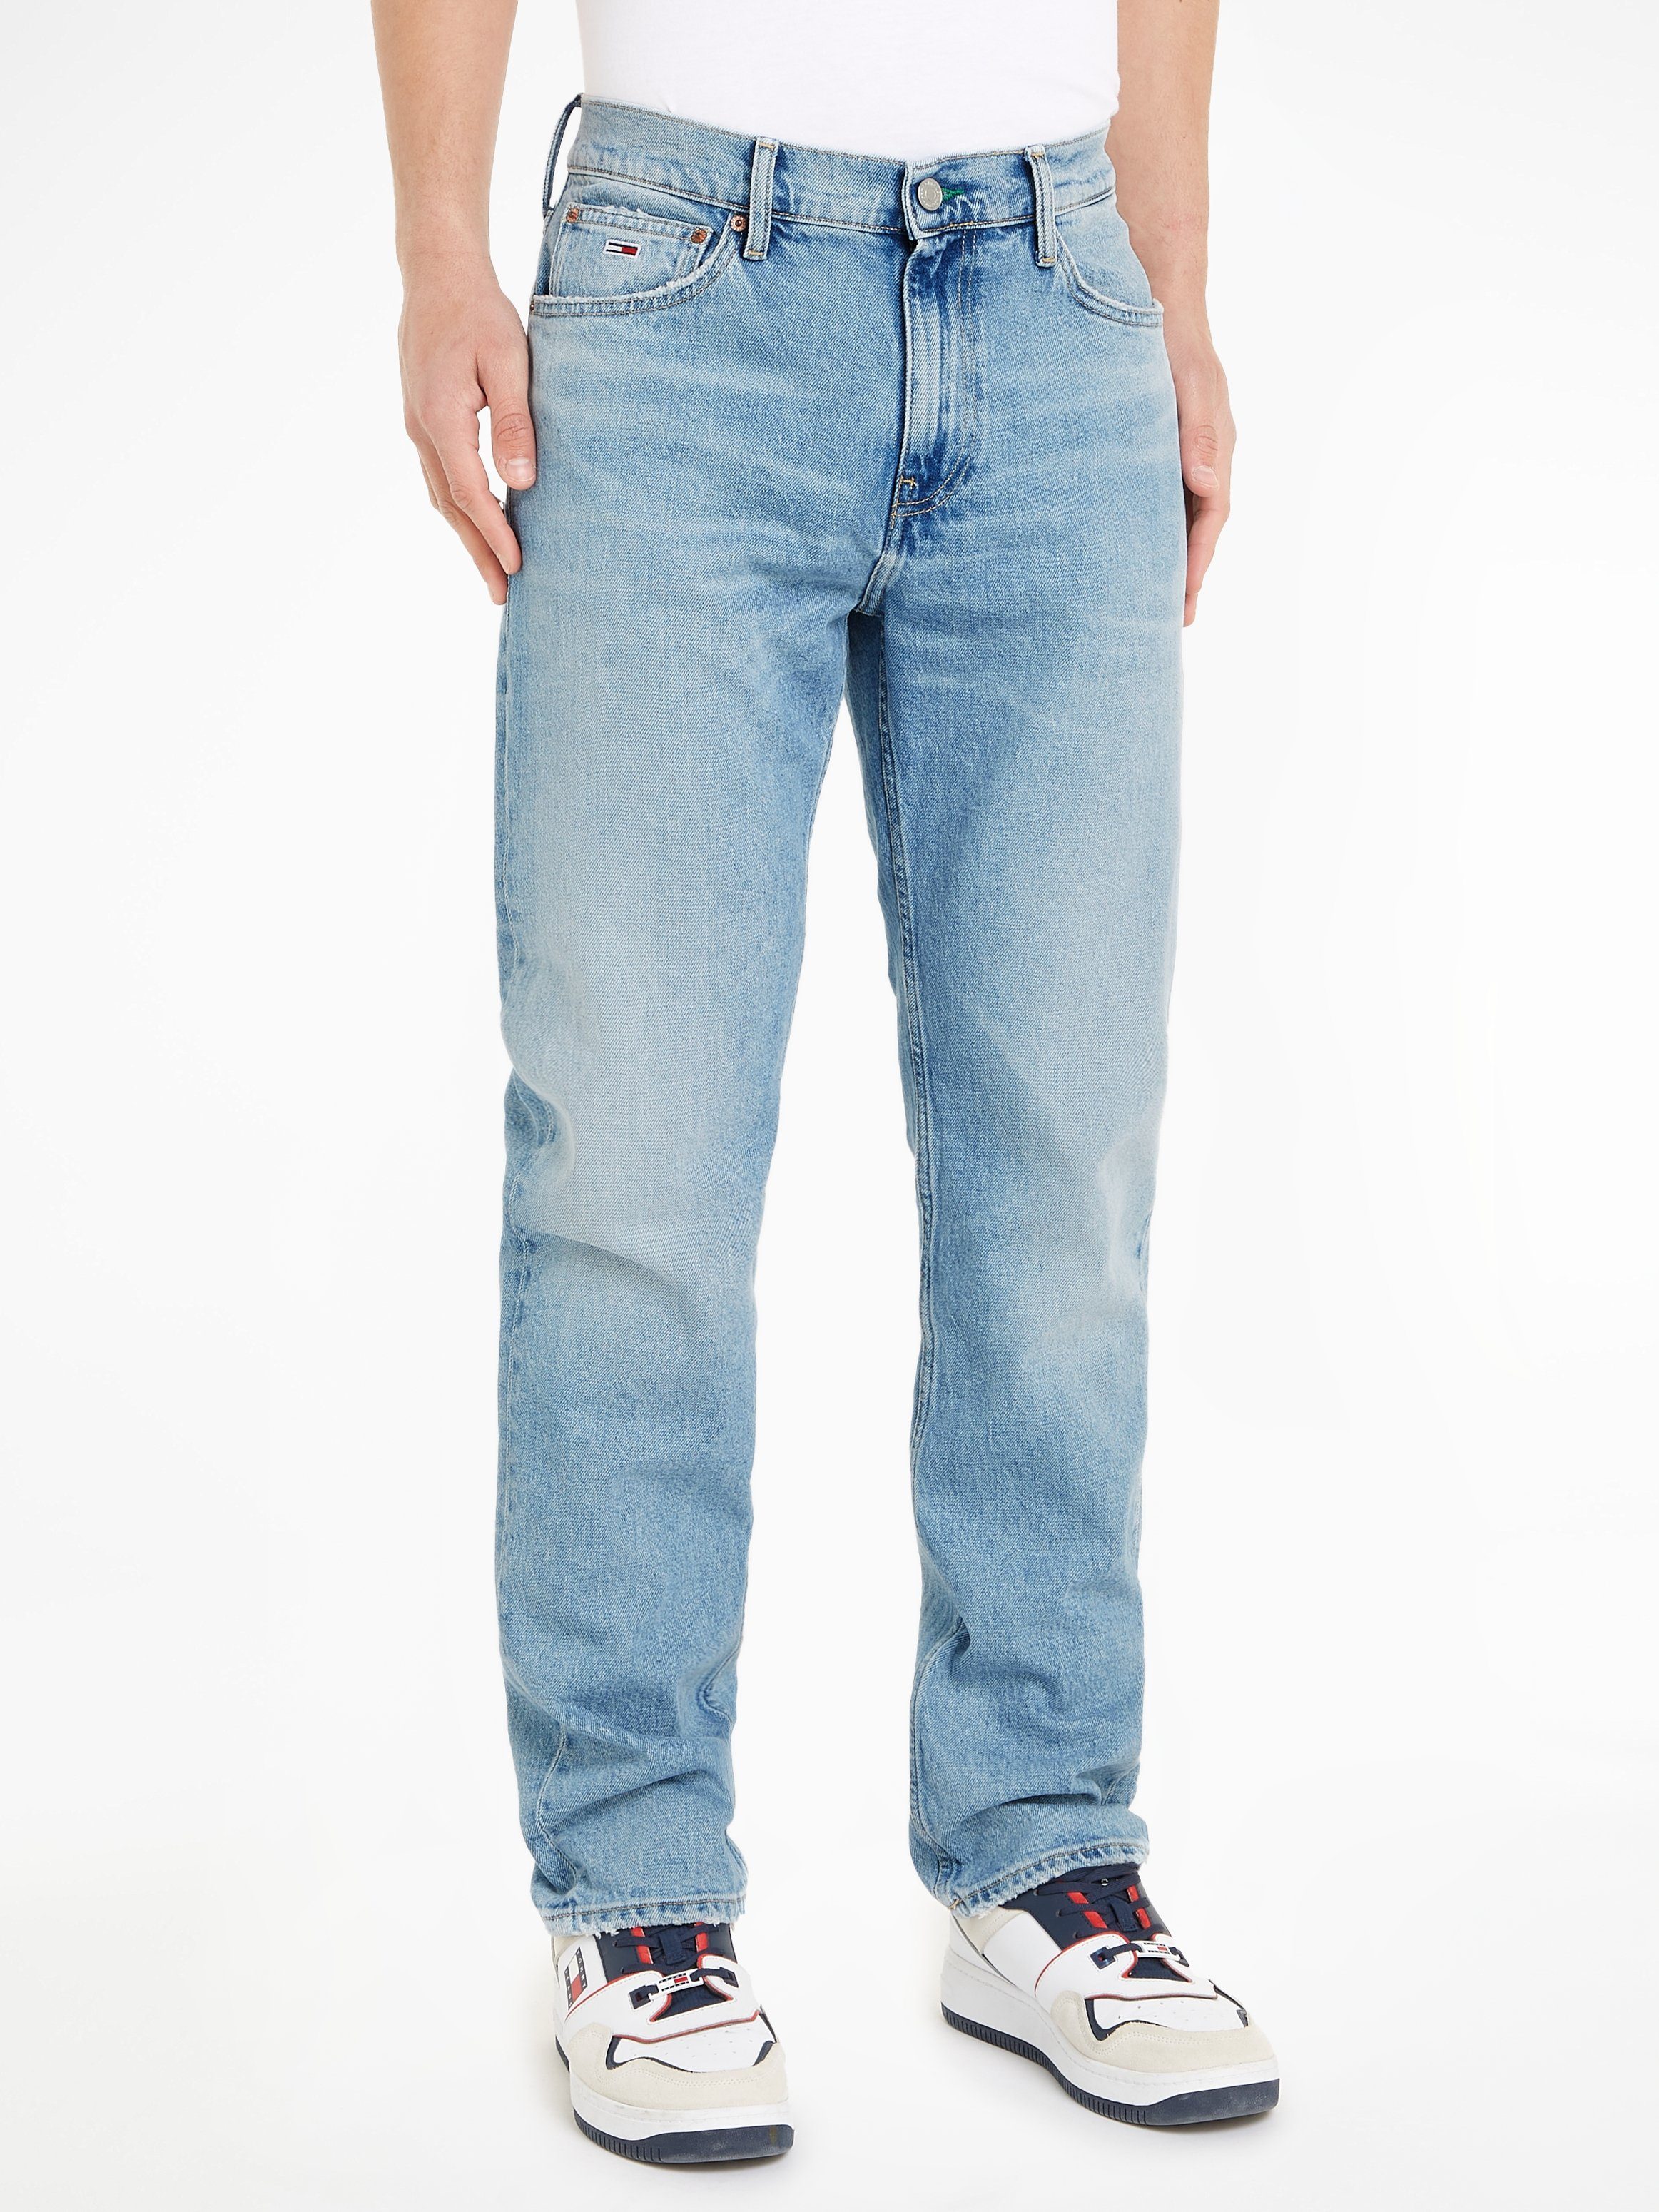 Tommy Jeans Relax-fit-Jeans ETHAN RLXD Light Denim im STRGHT 5-Pocket-Style